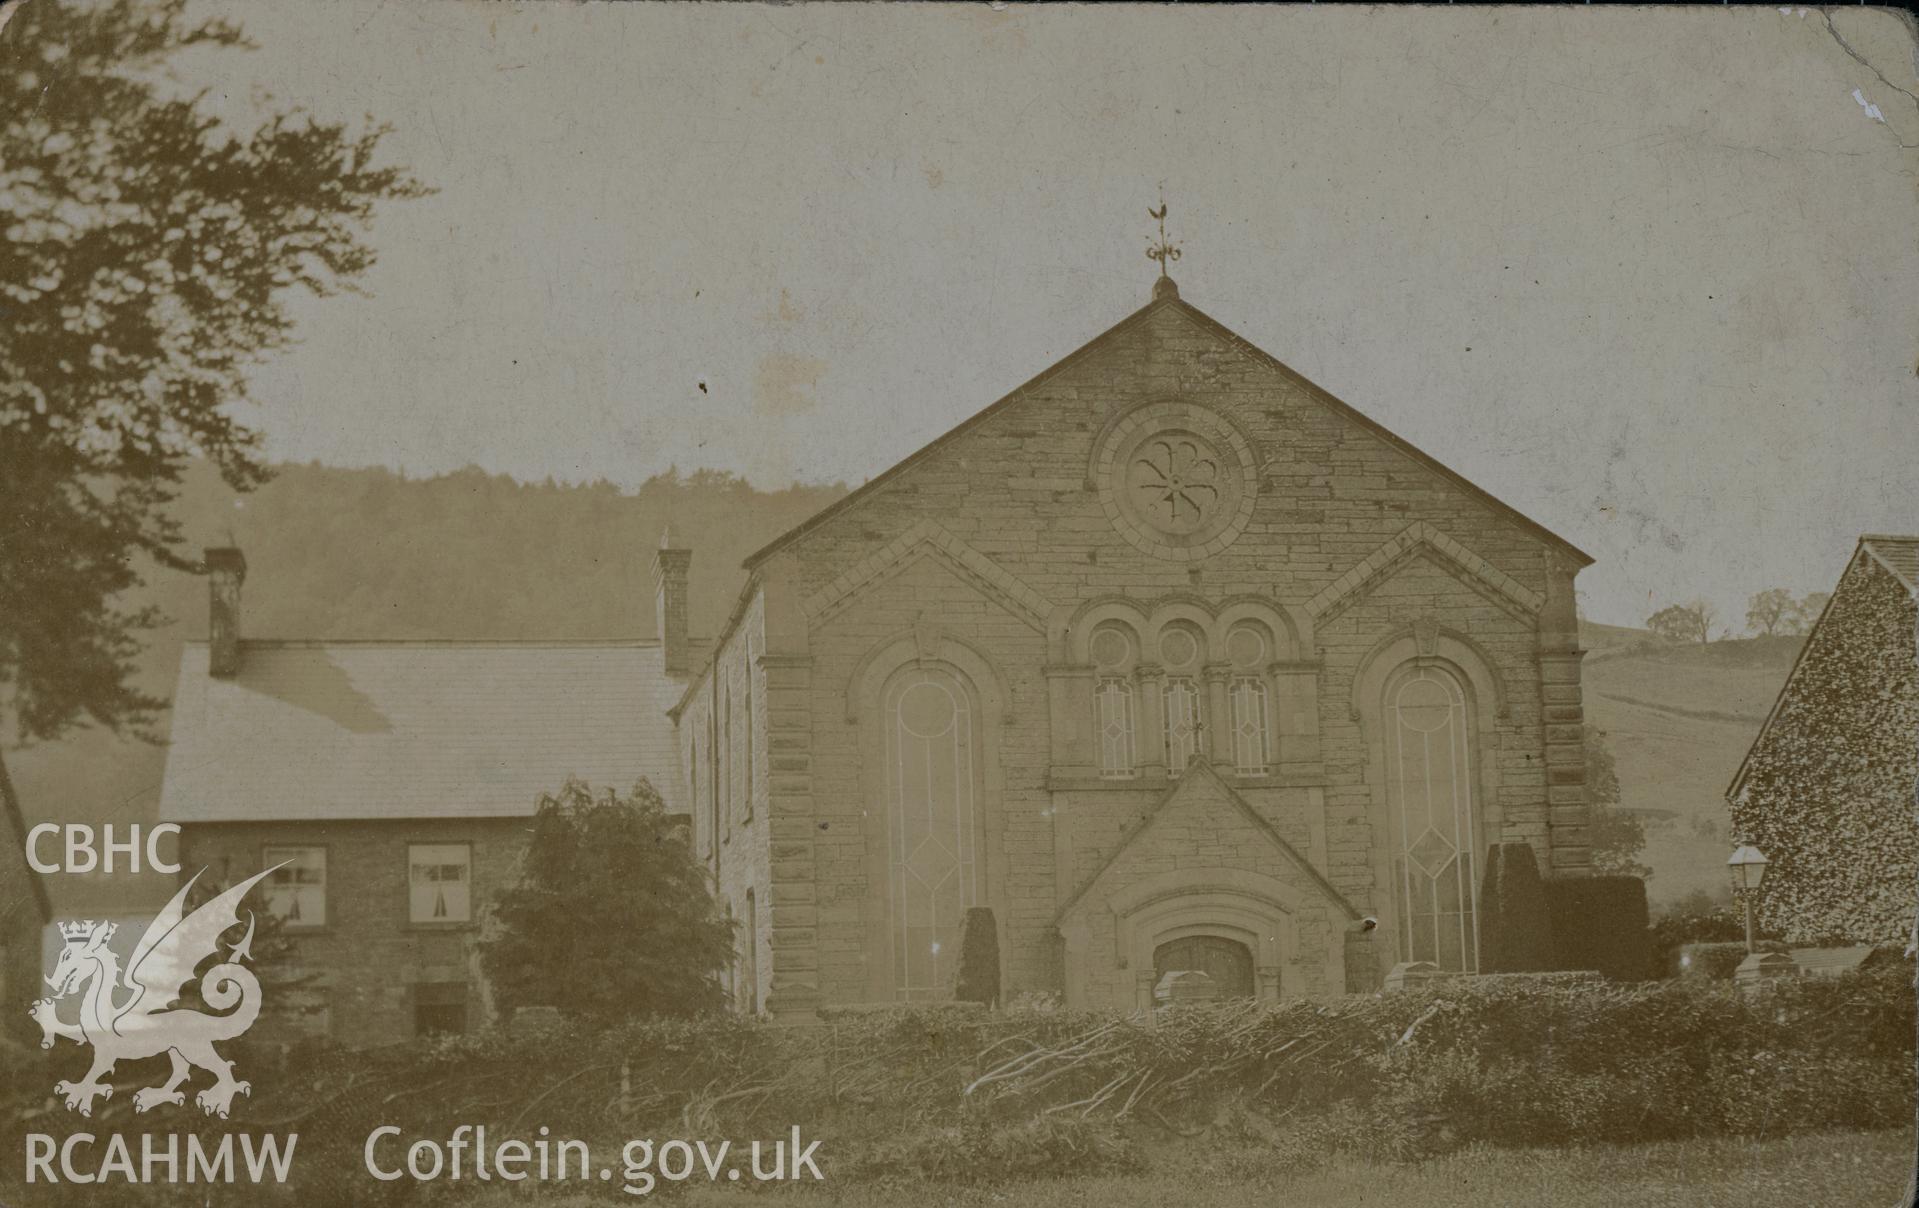 Digital copy of monochrome postcard showing exterior view of Llandderfel Welsh Calvinistic Methodist chapel. Loaned for copying by Thomas Lloyd.